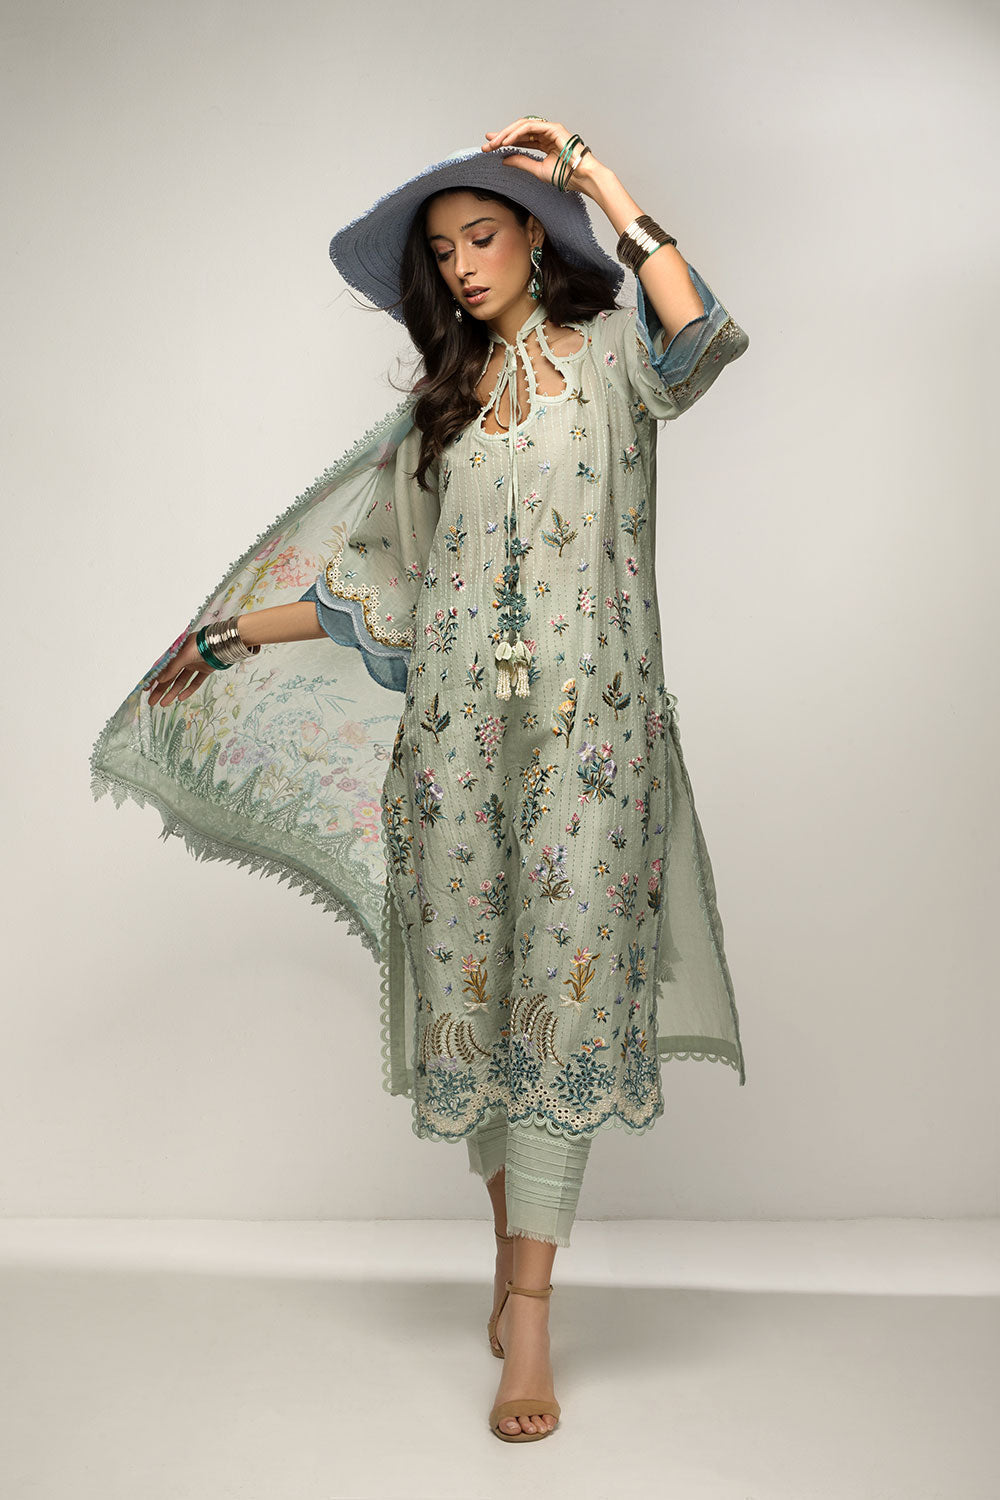 Buy Now, D#8A - Sobia Nazir Vital 2023 - Vol. 2 - Shahana Collection UK  - Wedding and Bridal Party Dresses - Sobia Nazir in UK - Summer Lawn 2023